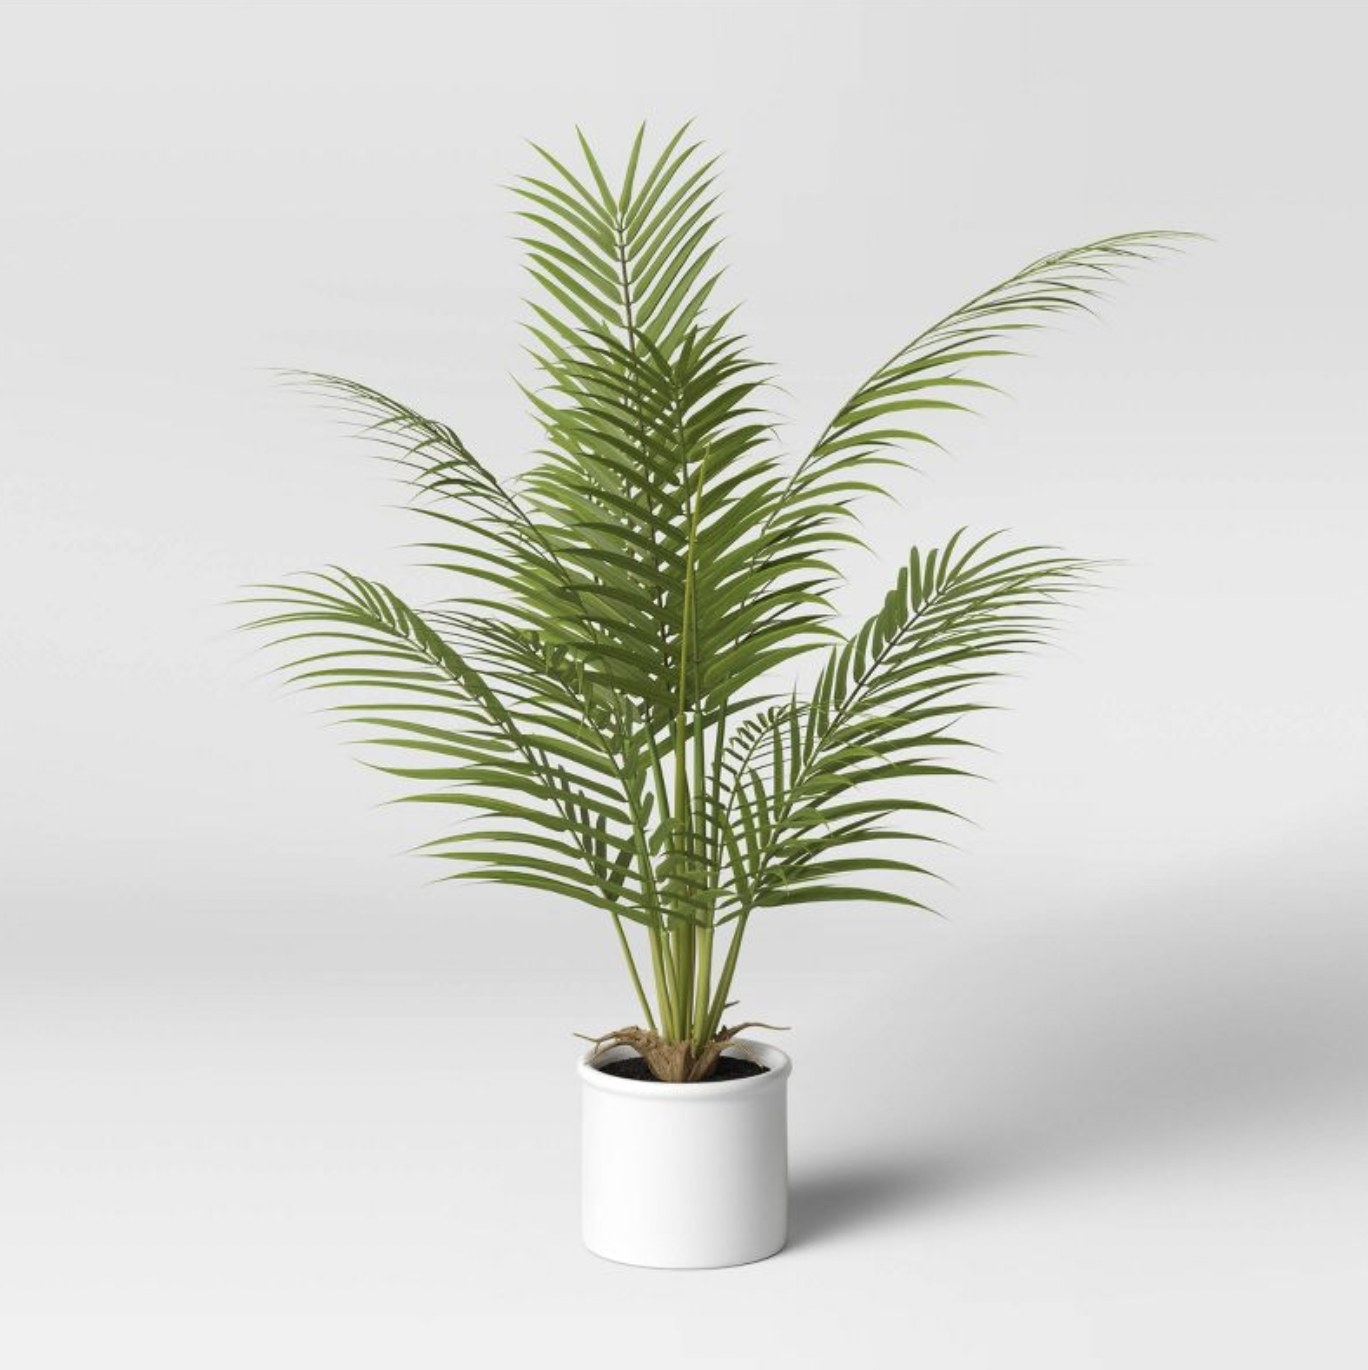 The potted palm plant